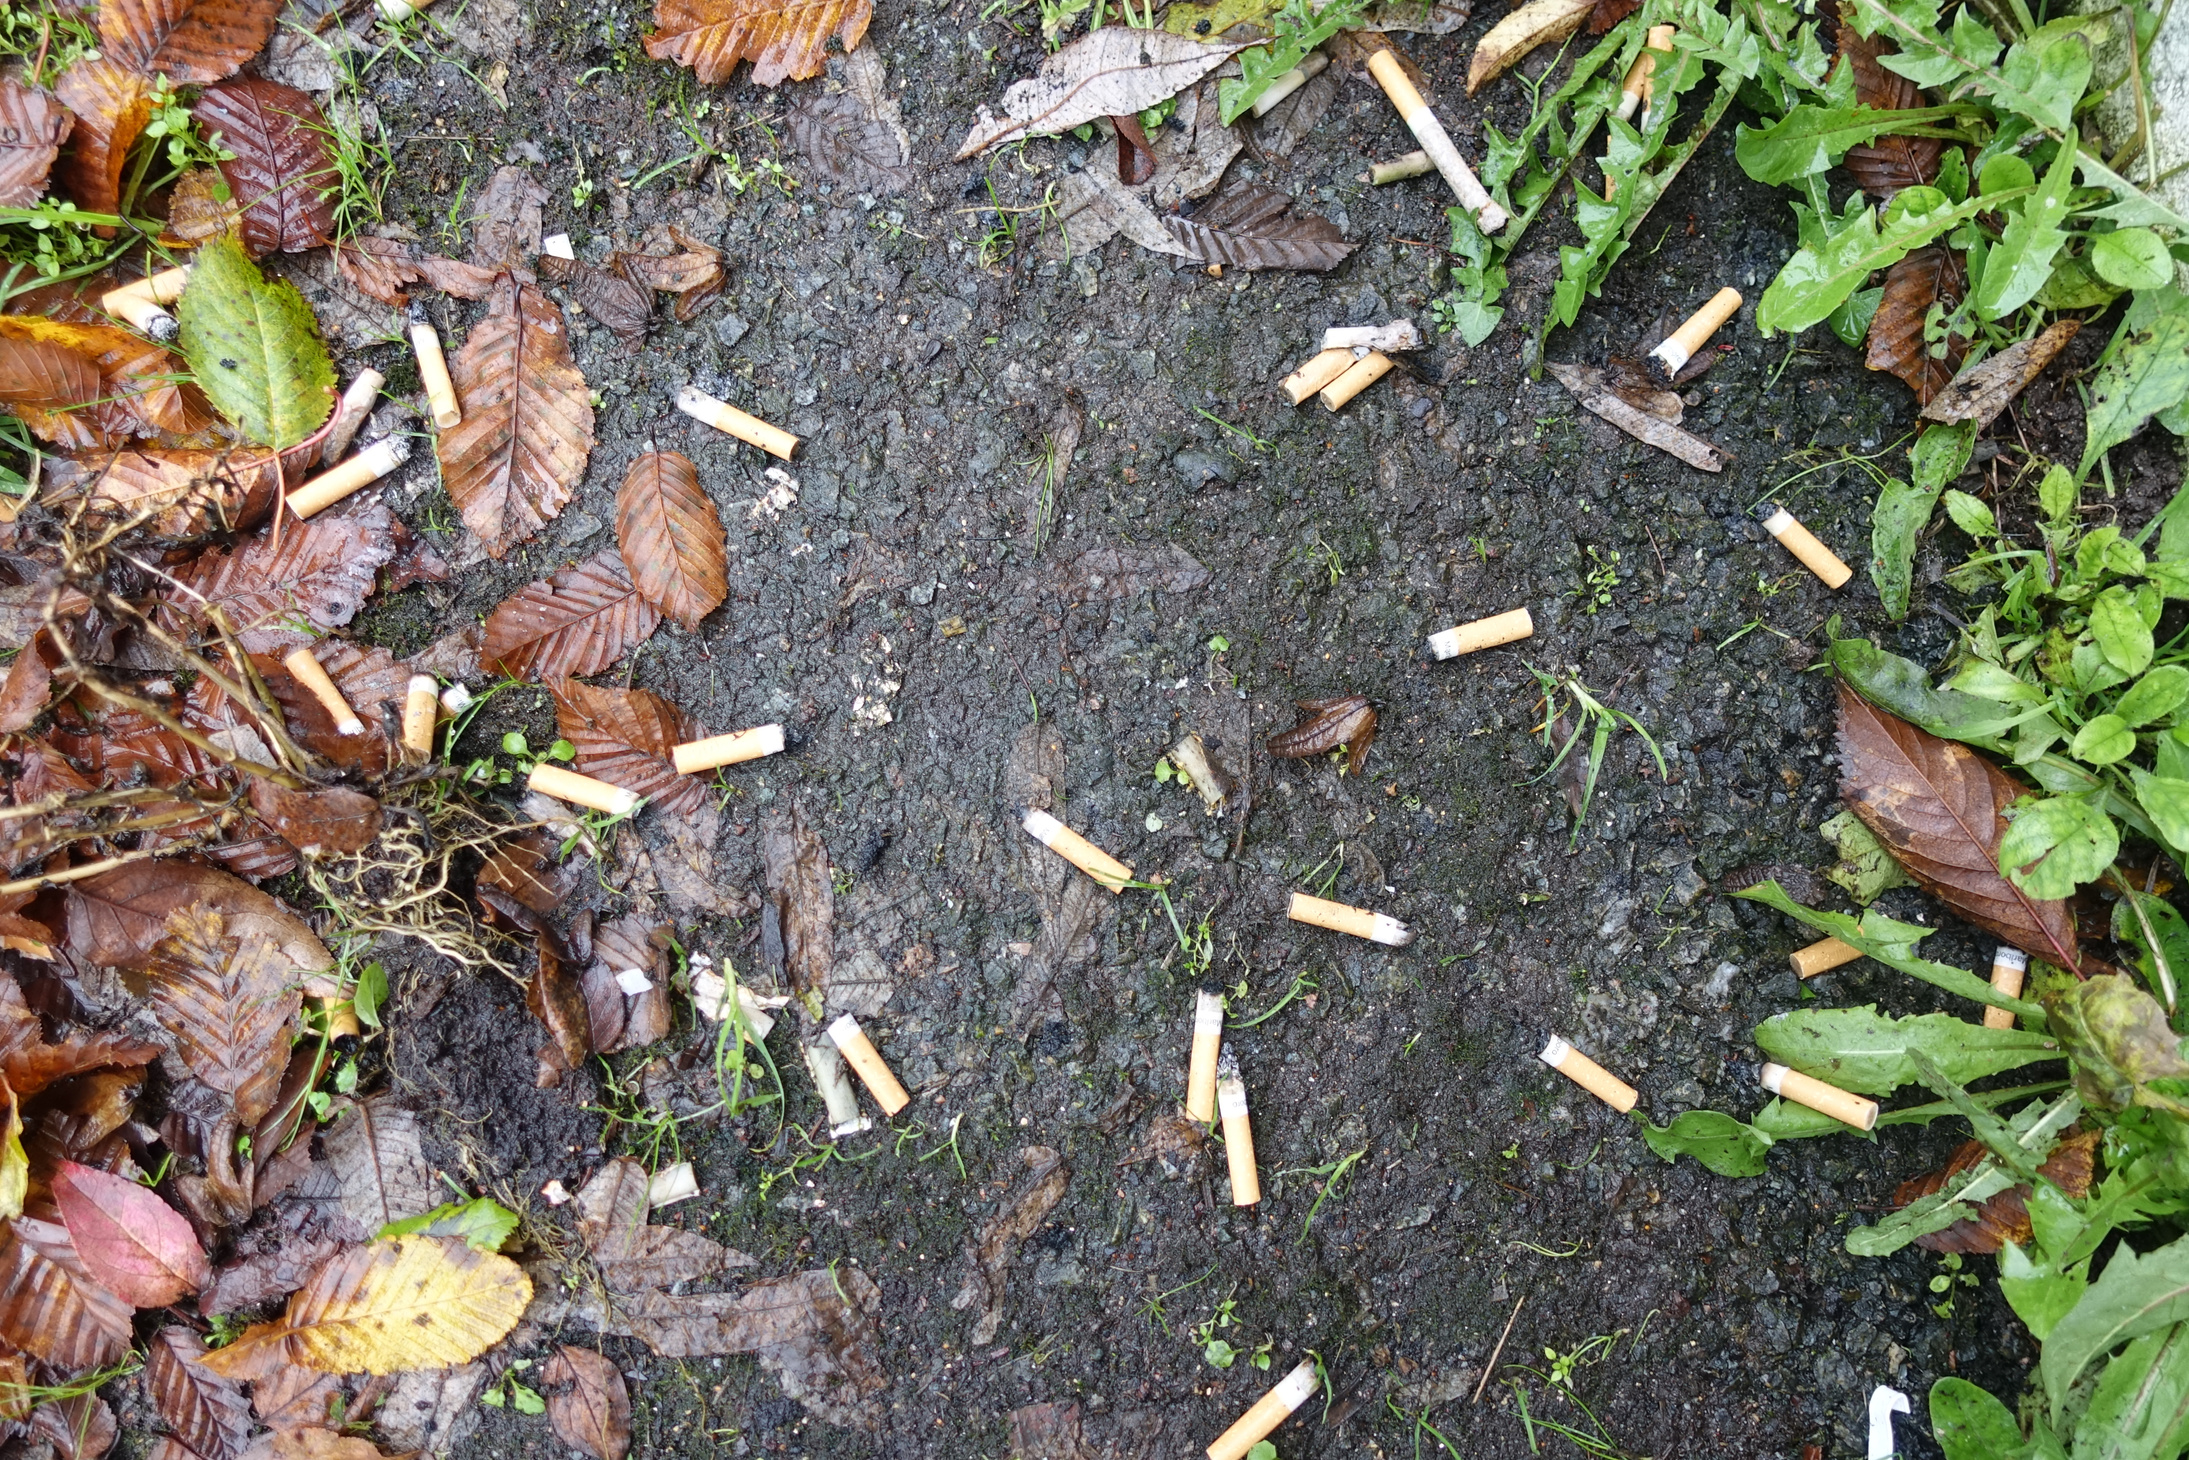 Cigarette butts on the ground  Garbage  Pollution